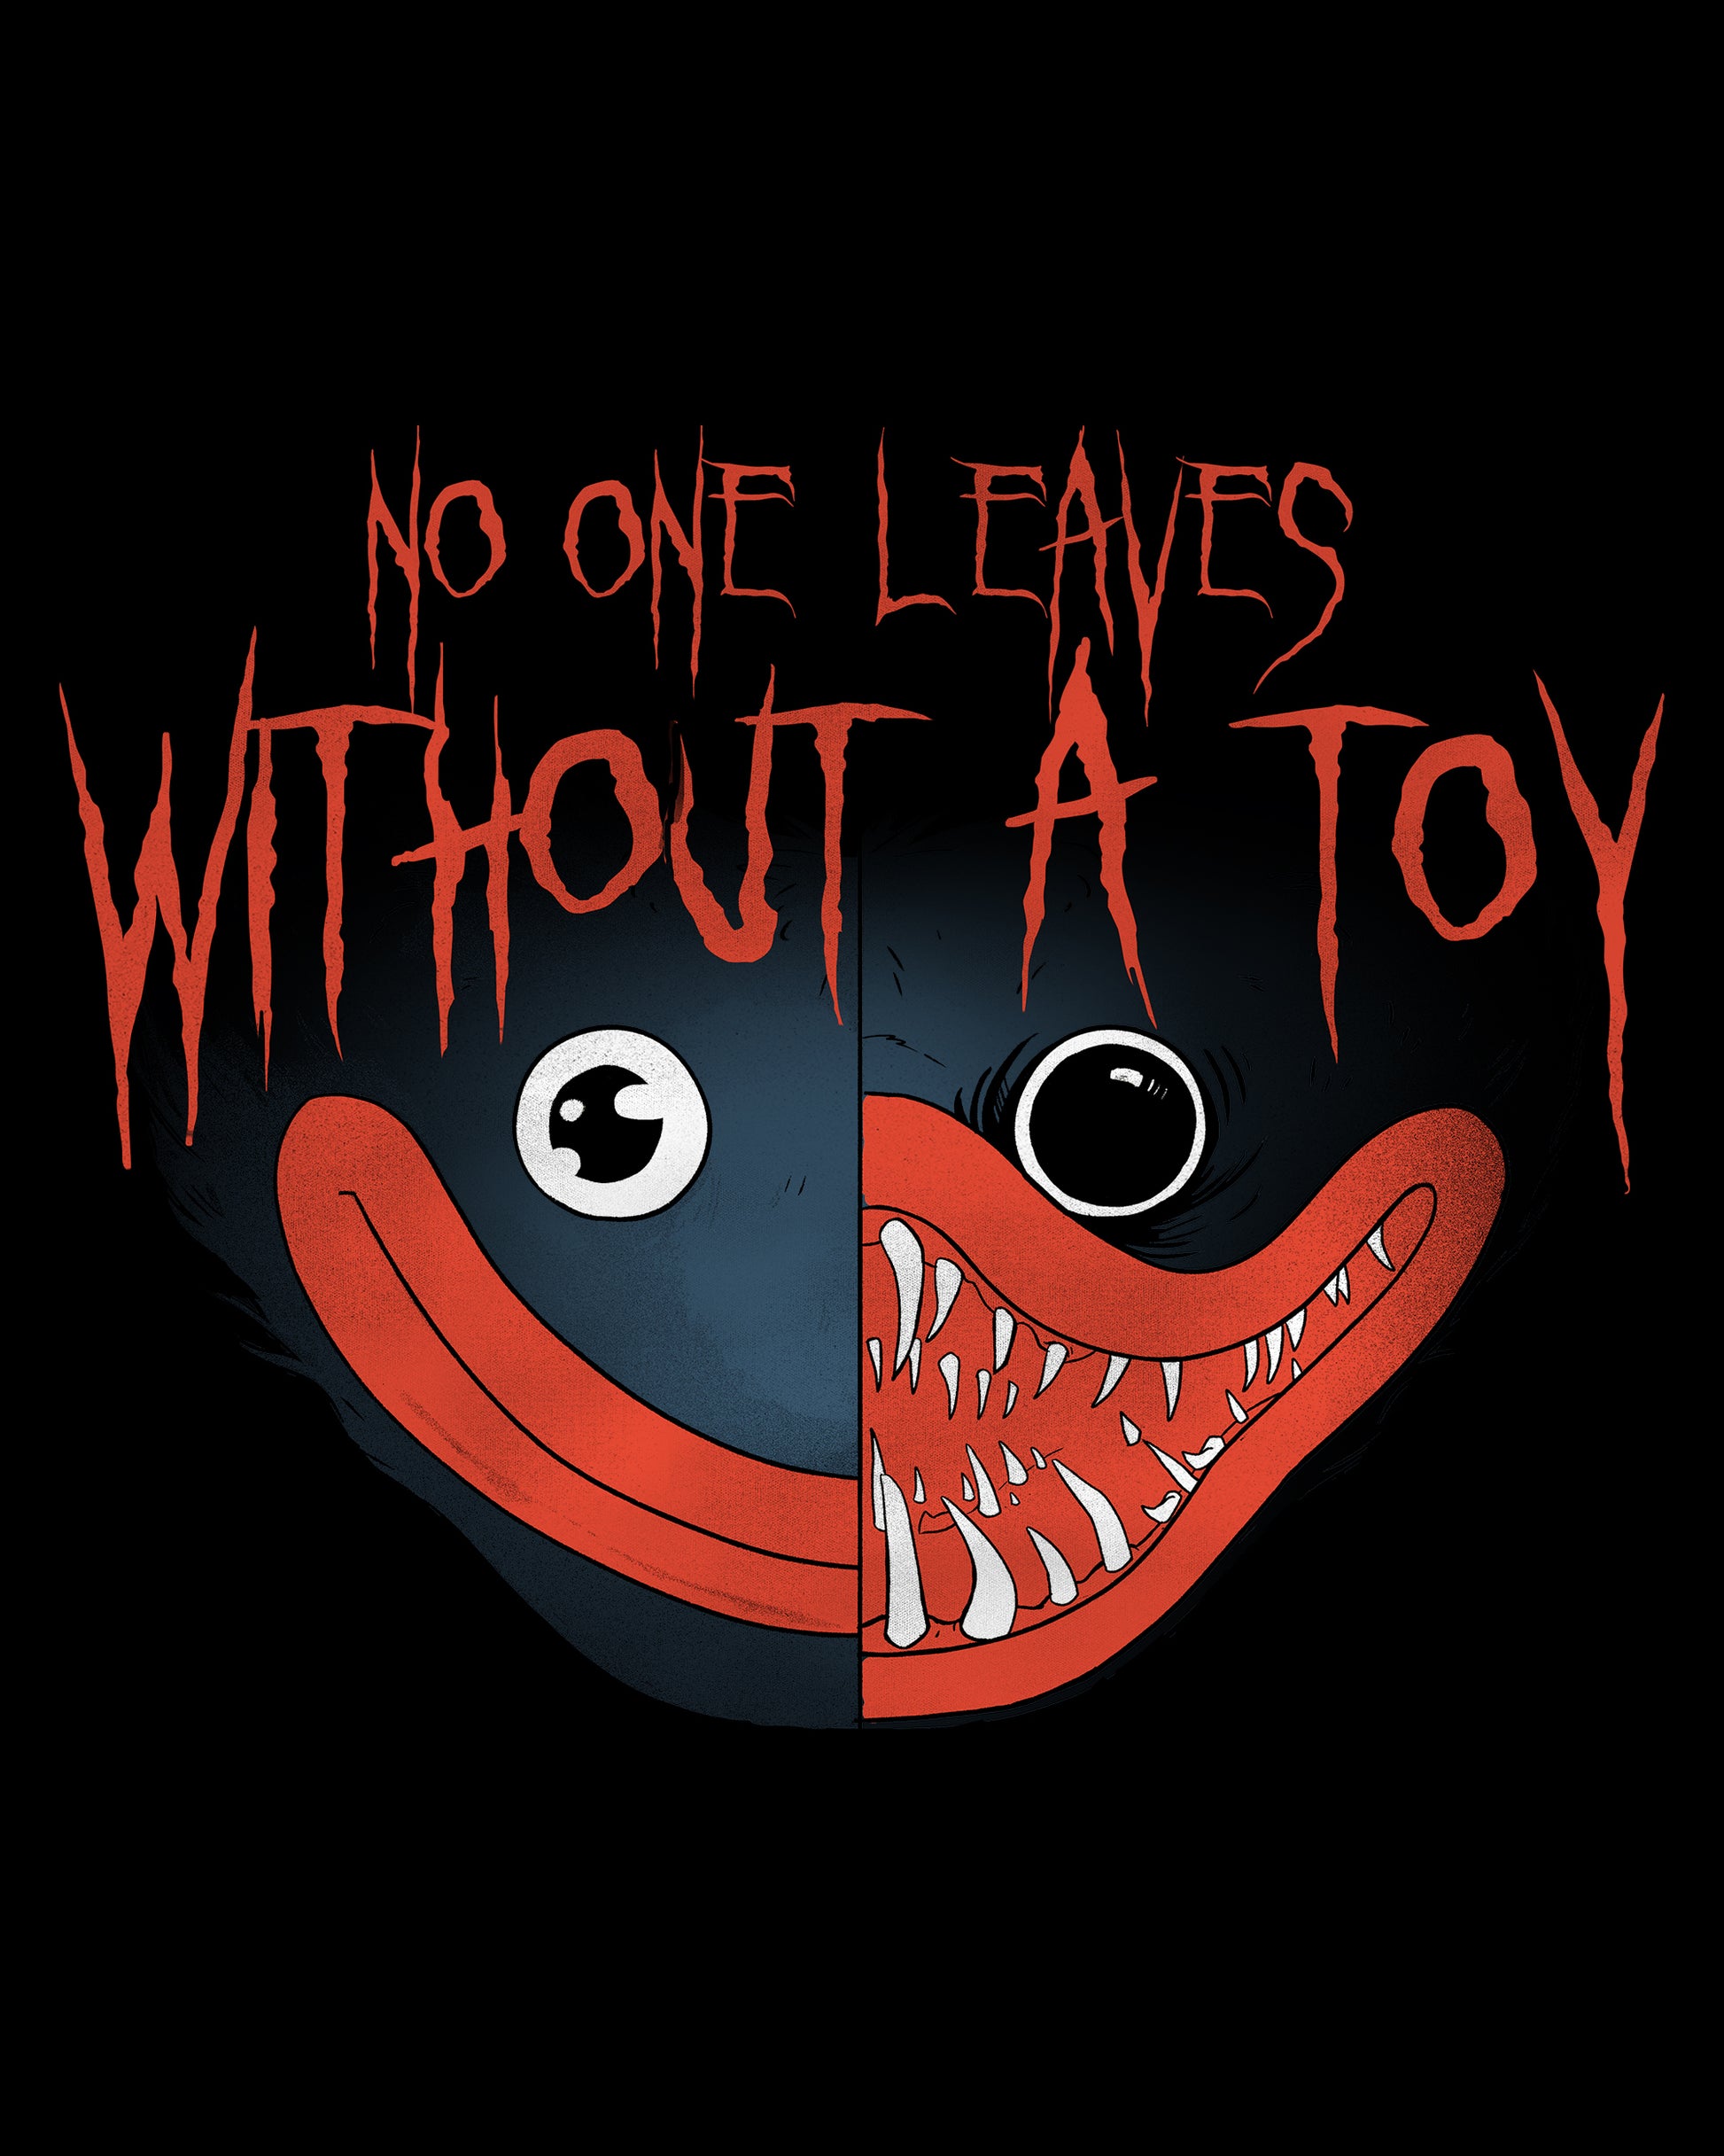 image on shirt: huggy wuggy smiling face on left side and evil huggy on right side. split down middle. text: no one leaves without a toy.